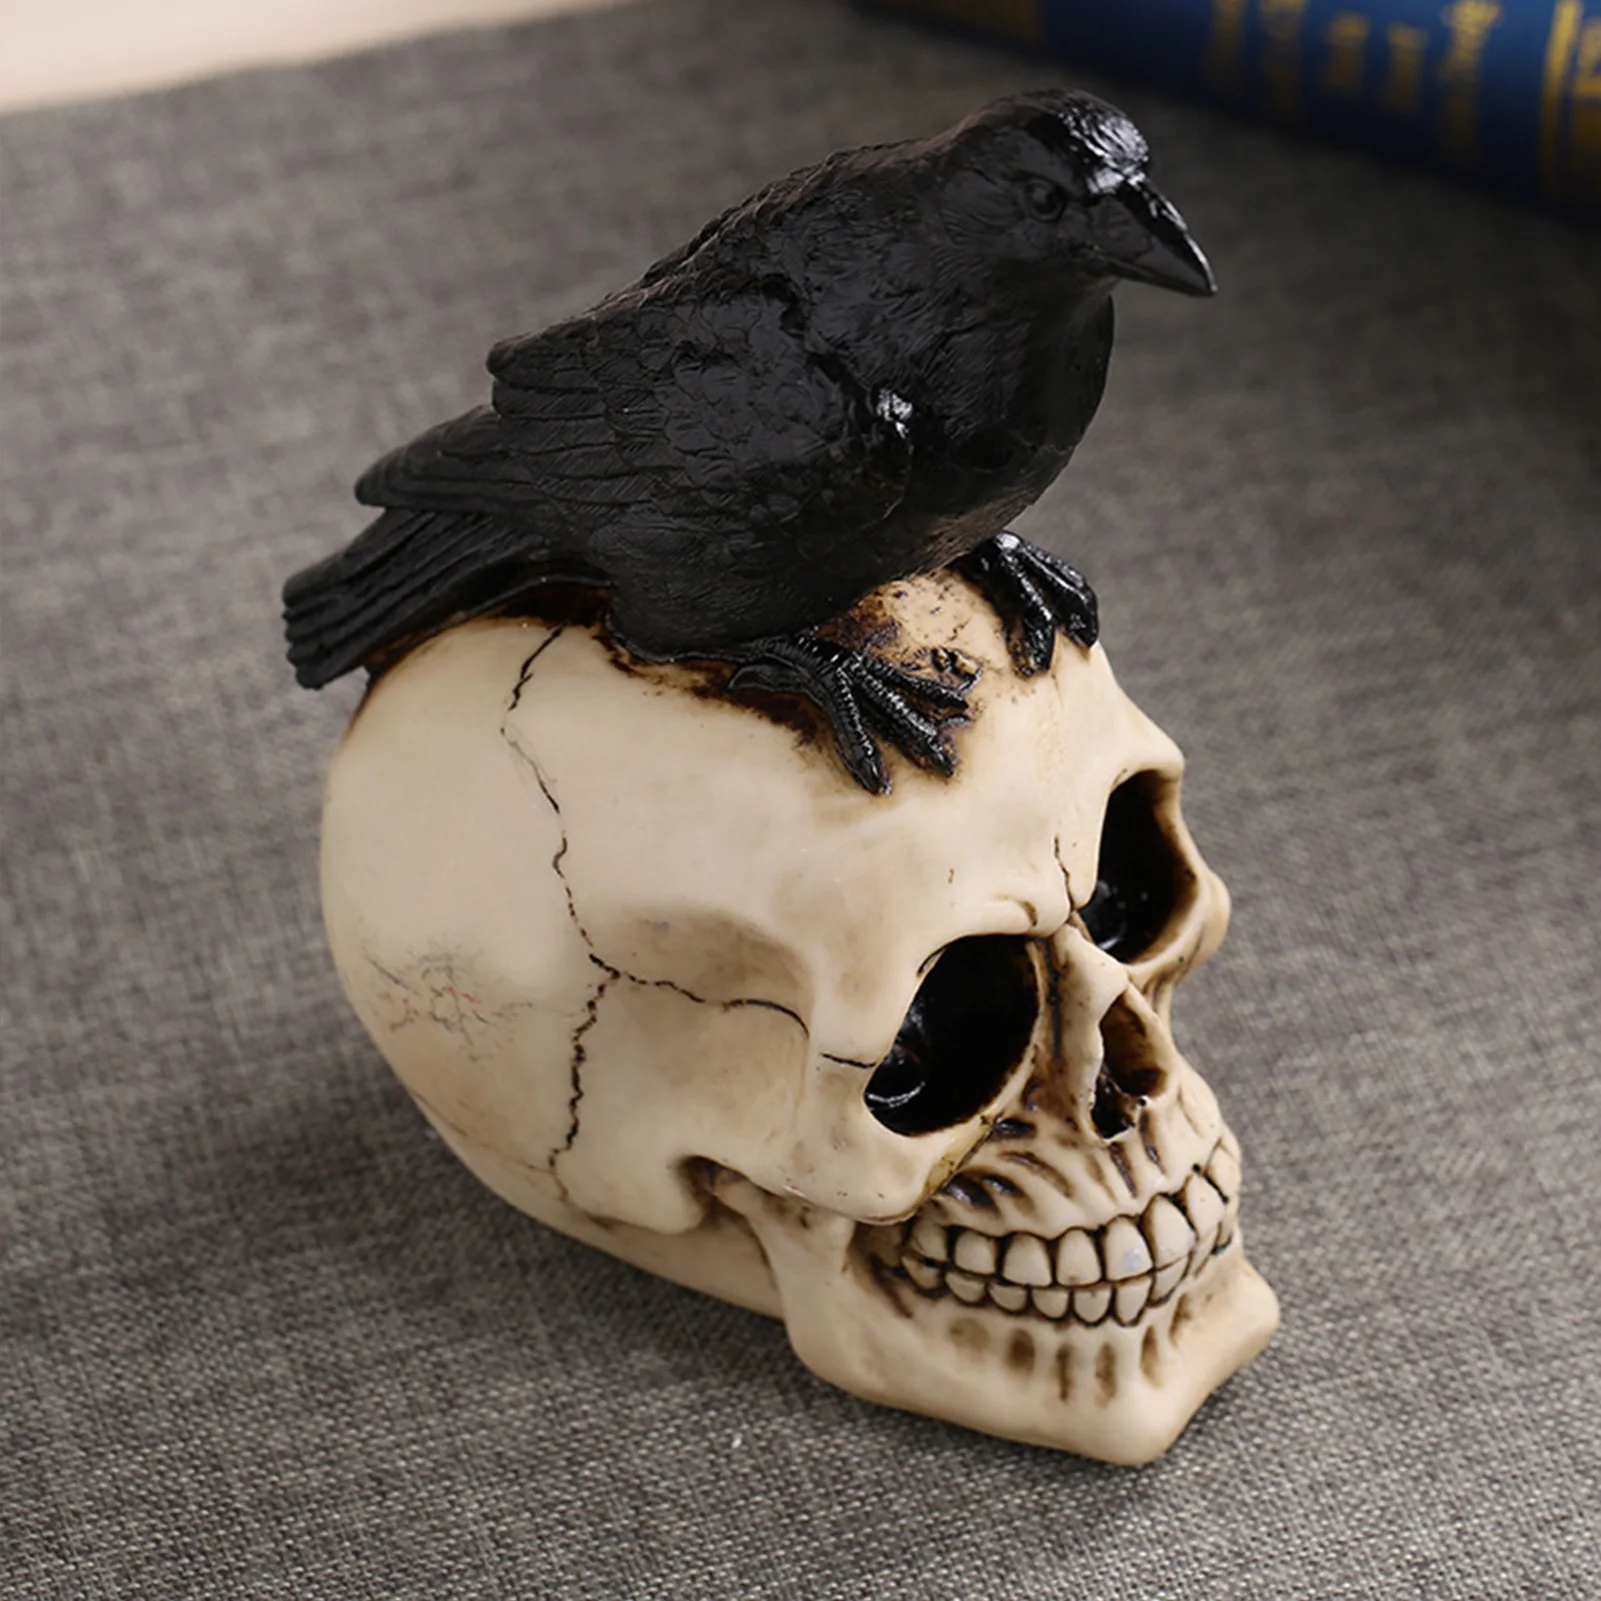 Creative Vintage Skeleton Statue Halloween Skull Crow Sculpture Ornament Decor Home Office Desk Decoration Crafts Gift | Дом и сад